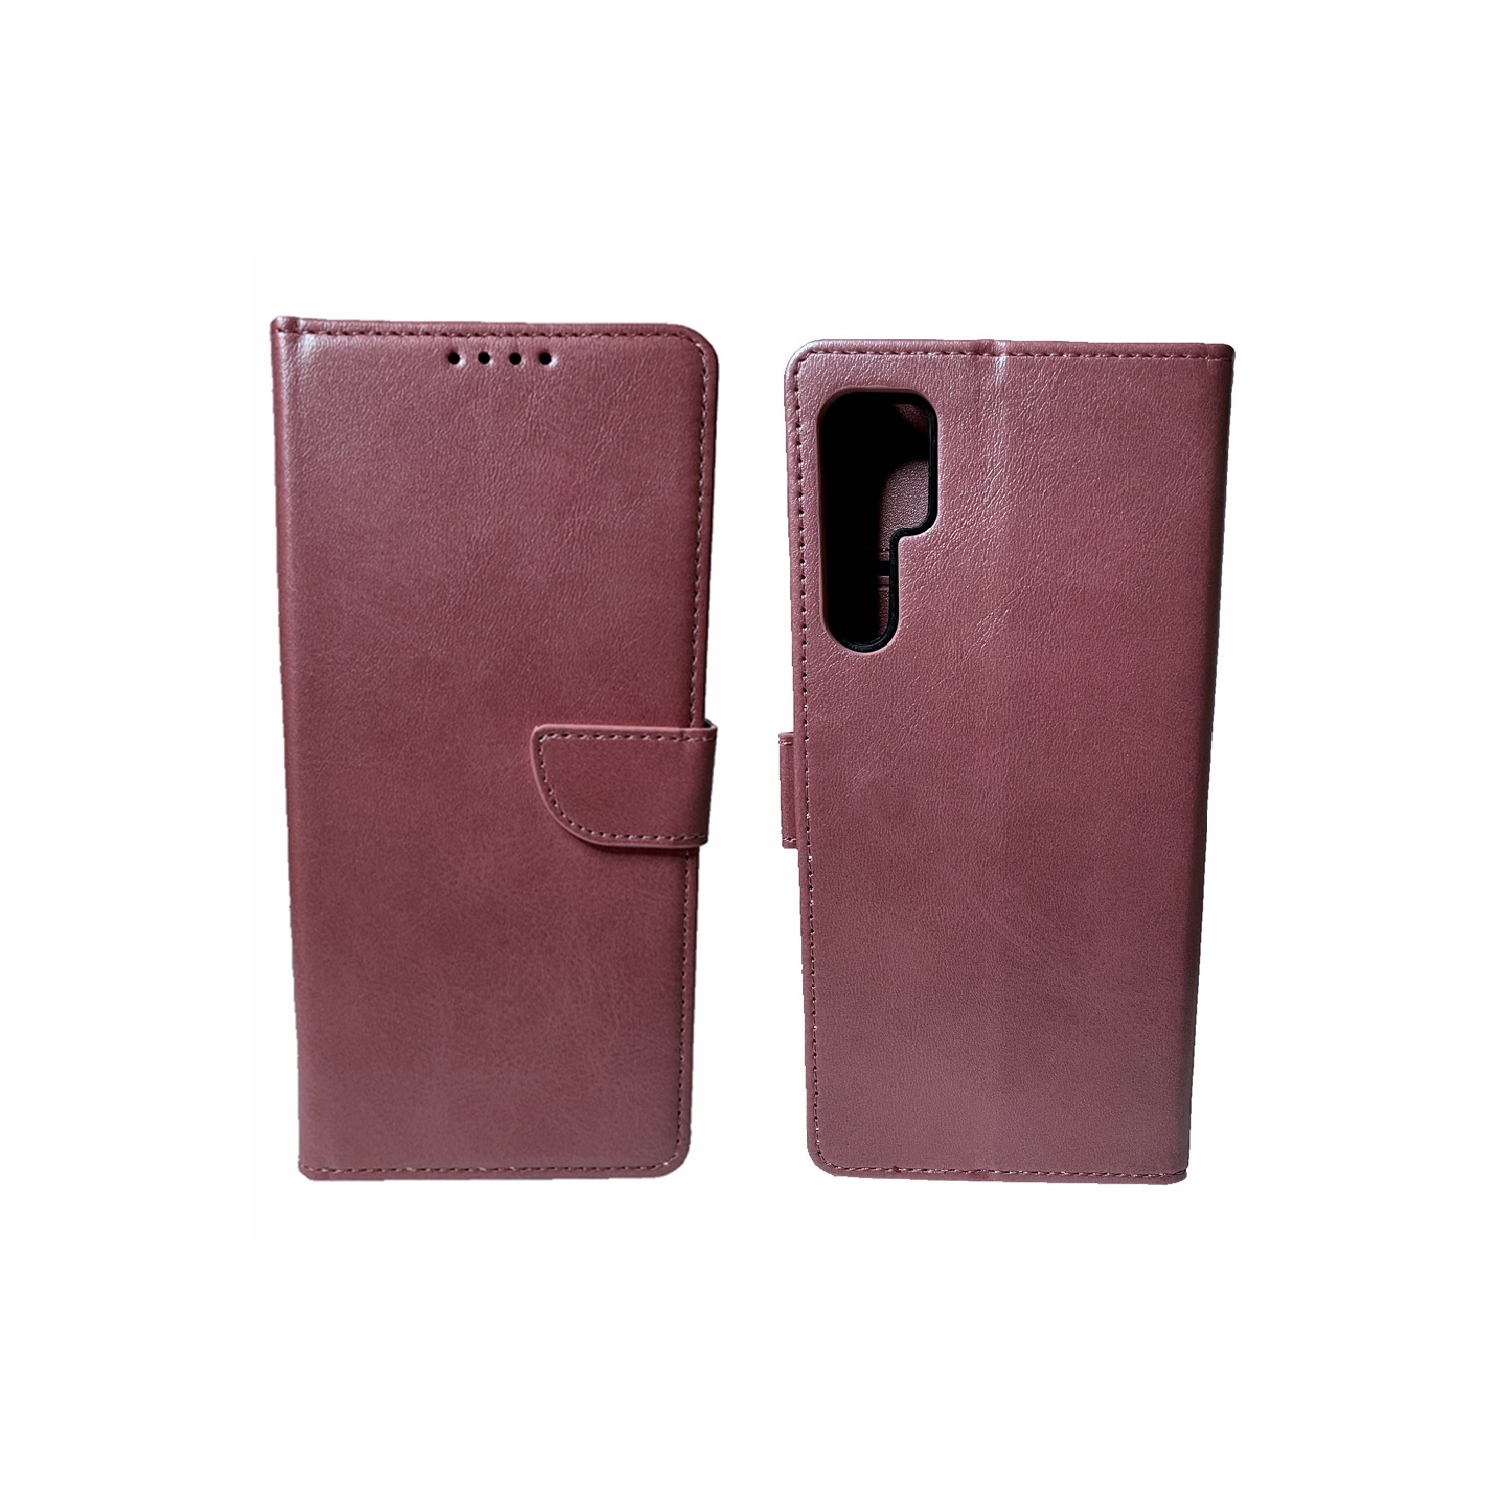 TopSave Leather Folio Flip Wallet w/Magnetic Clip Card Slot Holder Case For TCL 20 Pro, Rose Gold